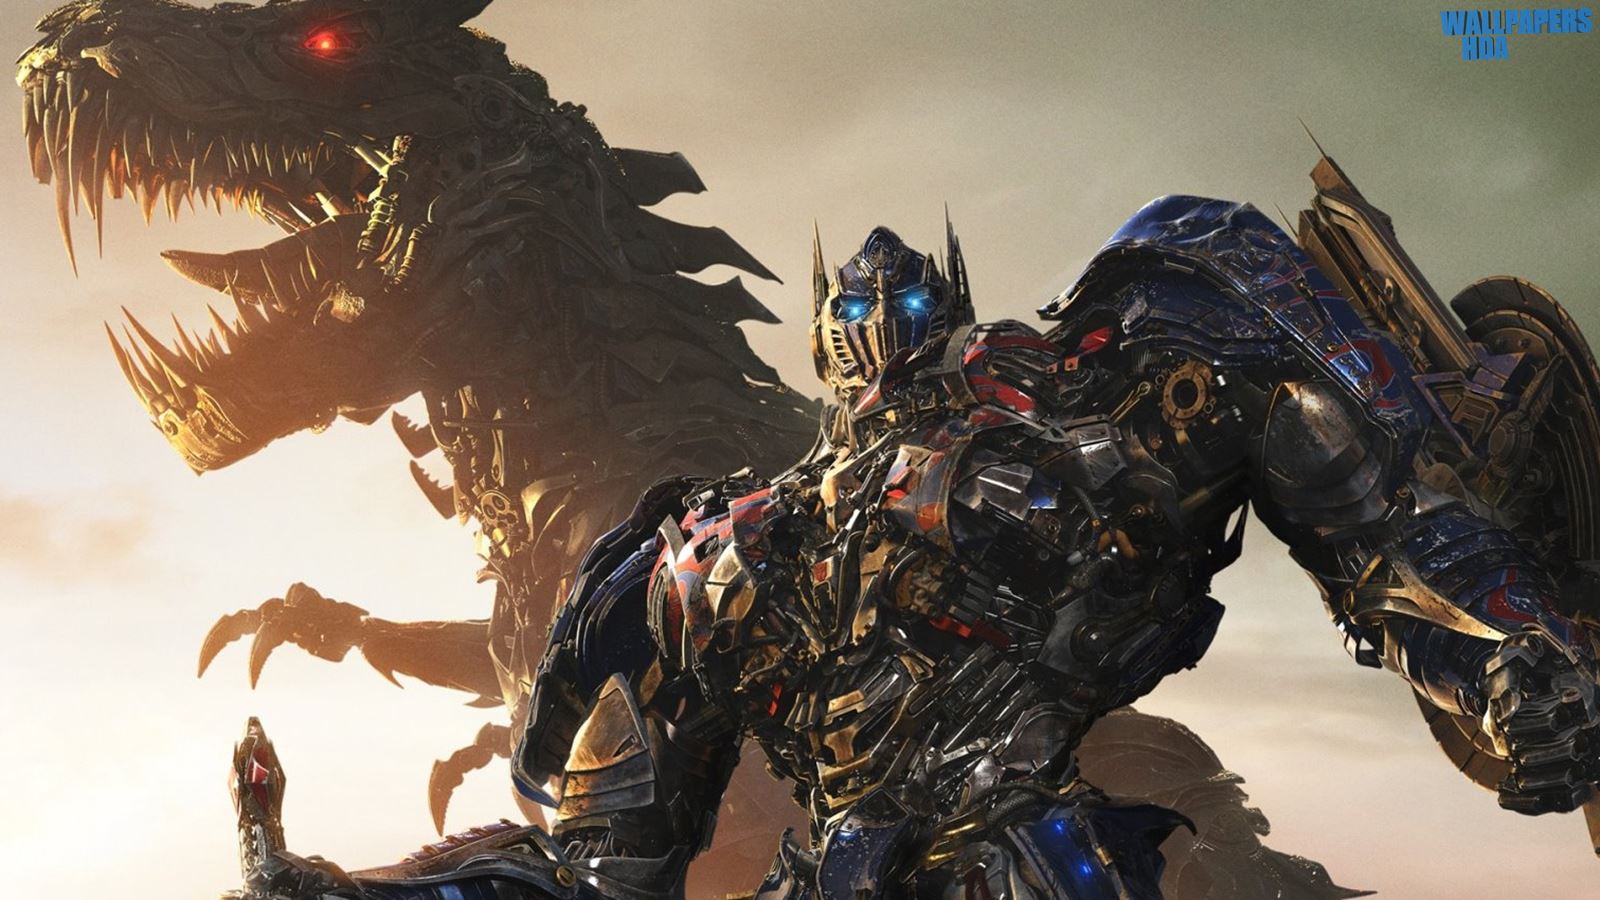 Transformers age of extinction 3 wallpaper 1600x900